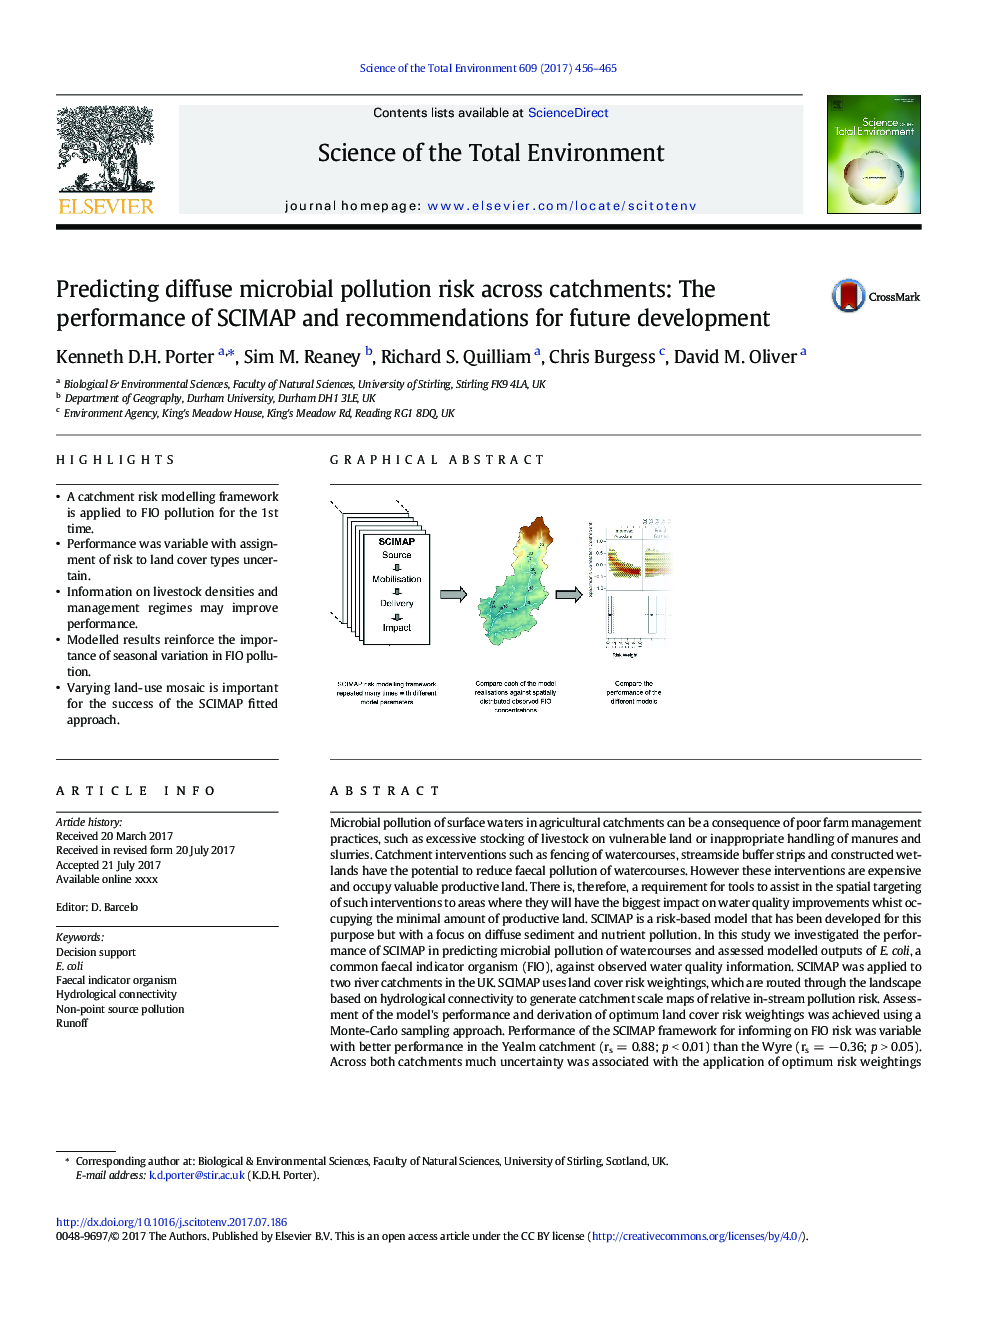 Predicting diffuse microbial pollution risk across catchments: The performance of SCIMAP and recommendations for future development